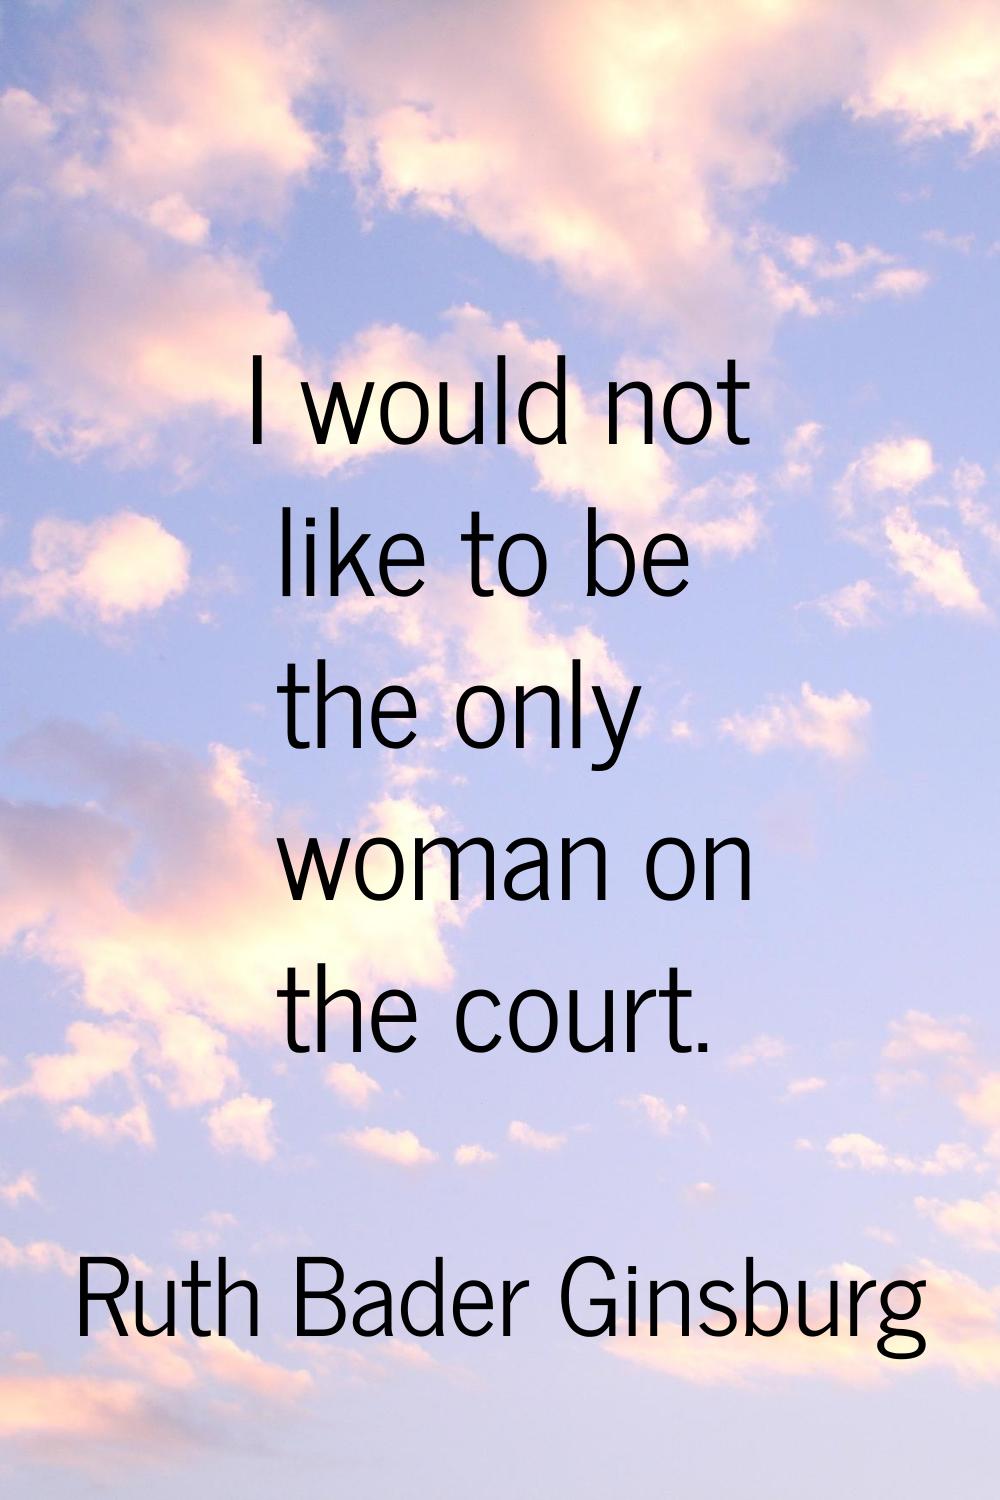 I would not like to be the only woman on the court.